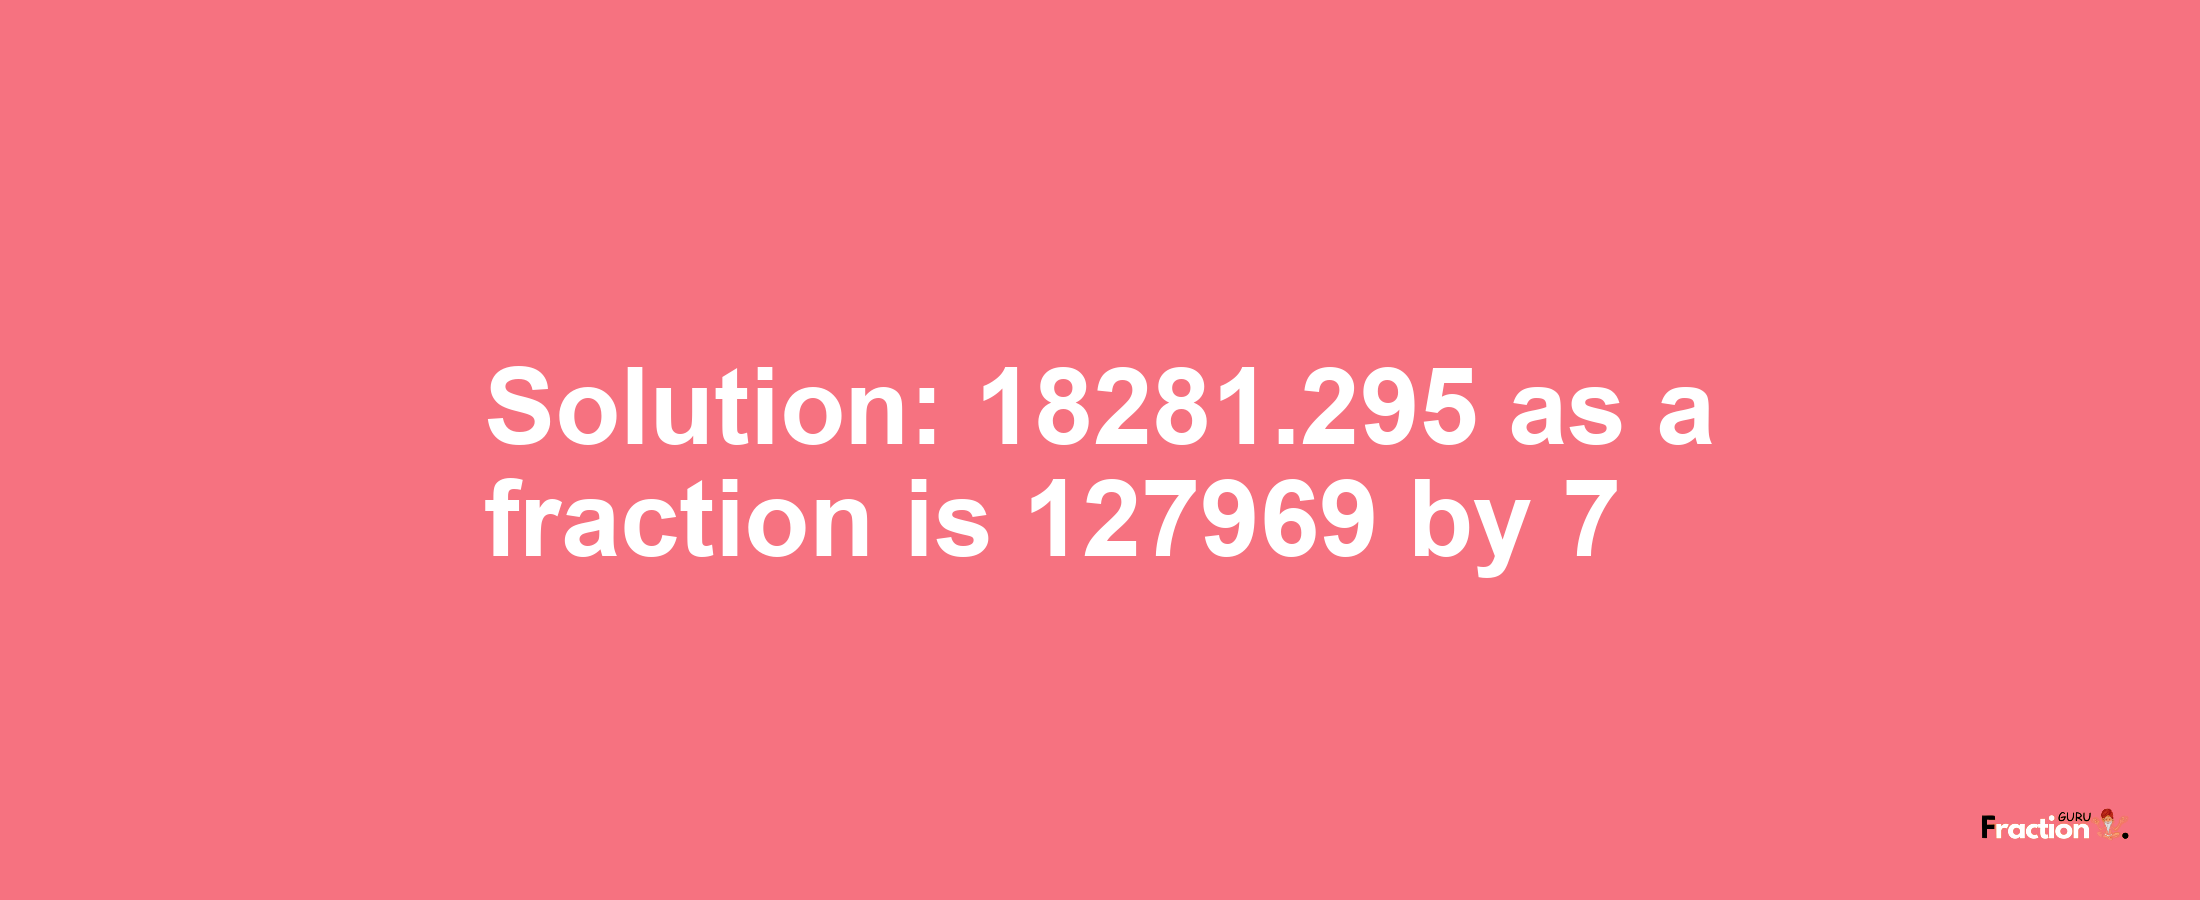 Solution:18281.295 as a fraction is 127969/7